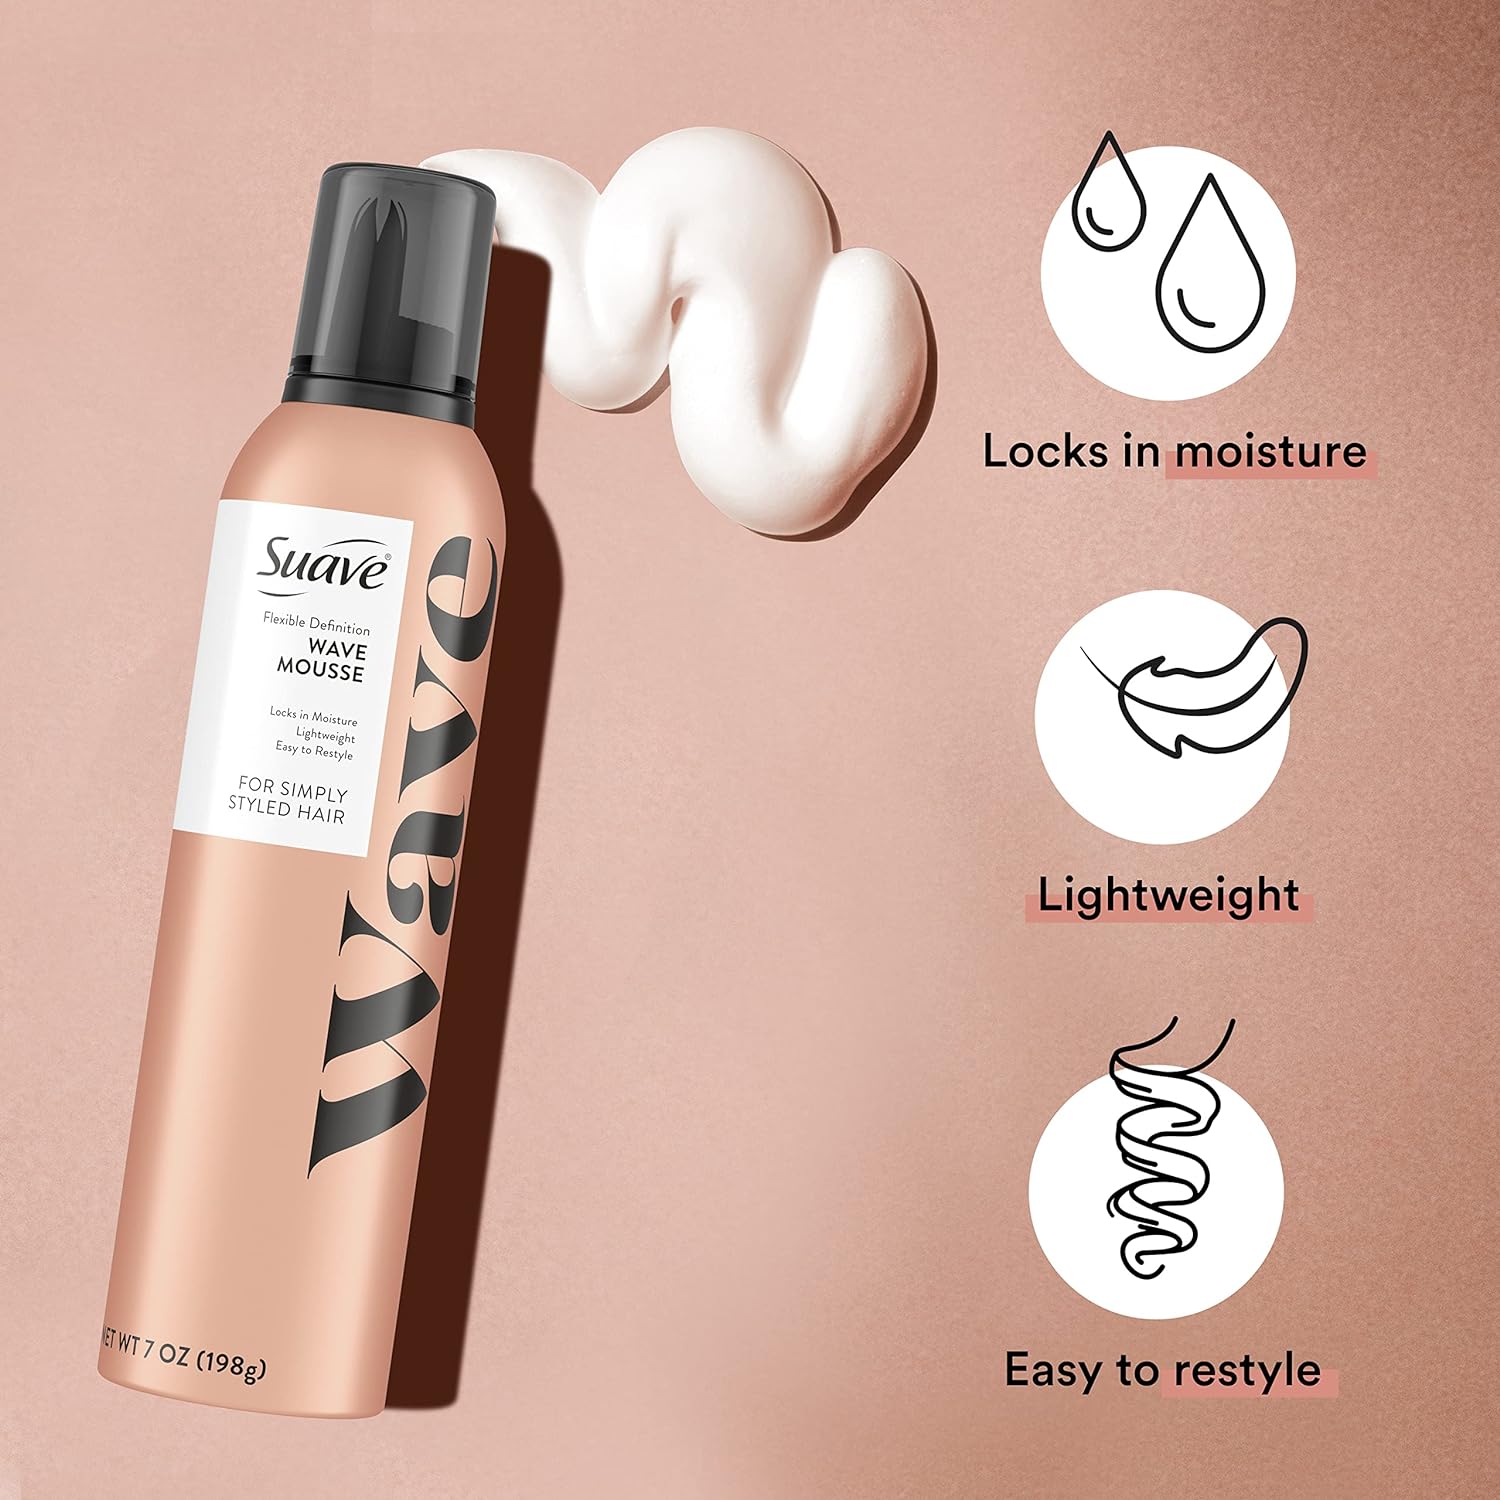 Suave Simply Styled Lightweight Hair Mousse, Wave Mousse Locks in Moisture for Crunch Free Curls 7 oz : Beauty & Personal Care